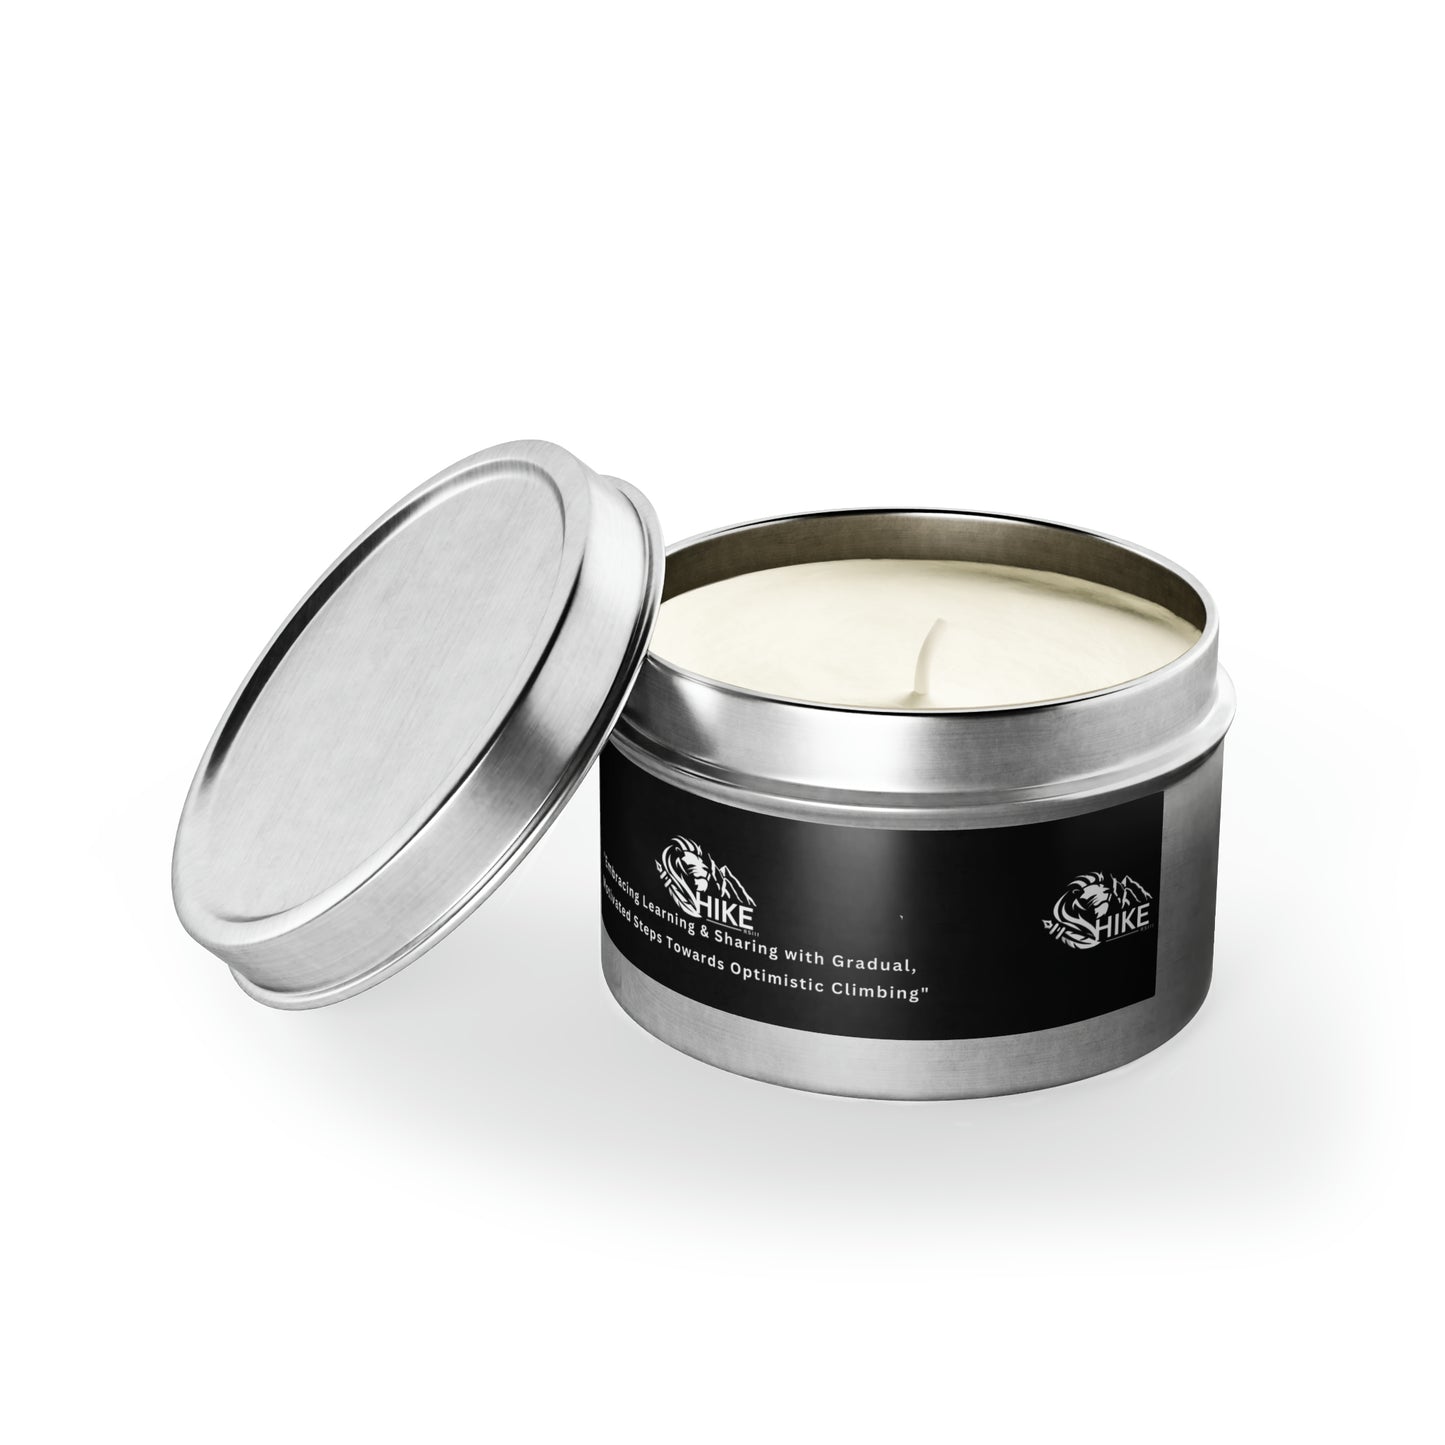 Empowerment Flame: HikersIII Motivational Soy Wax Candle